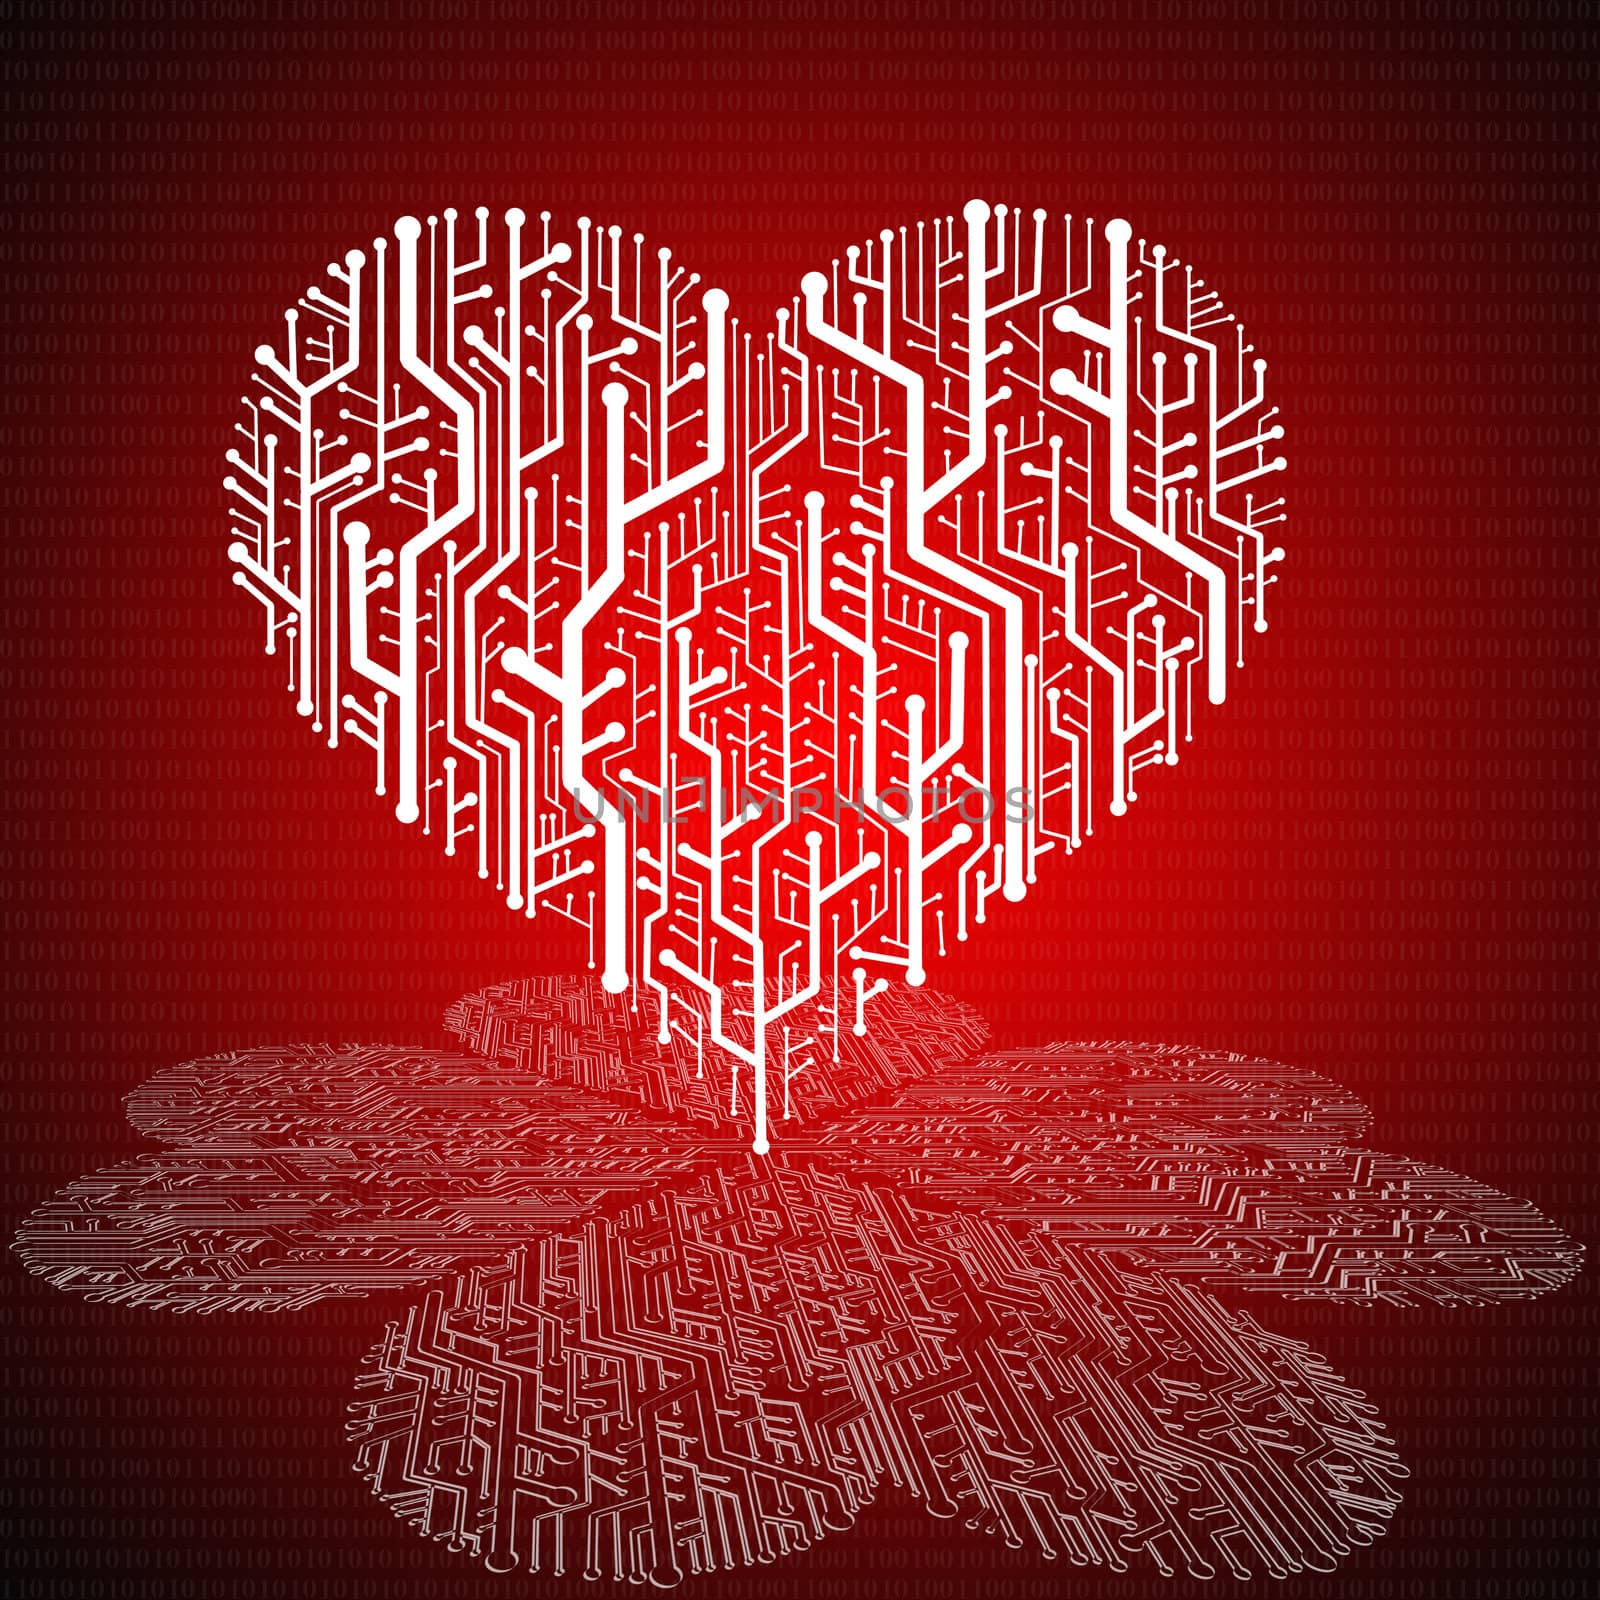 Circuit board in Heart shape with pattern on ground by pixbox77